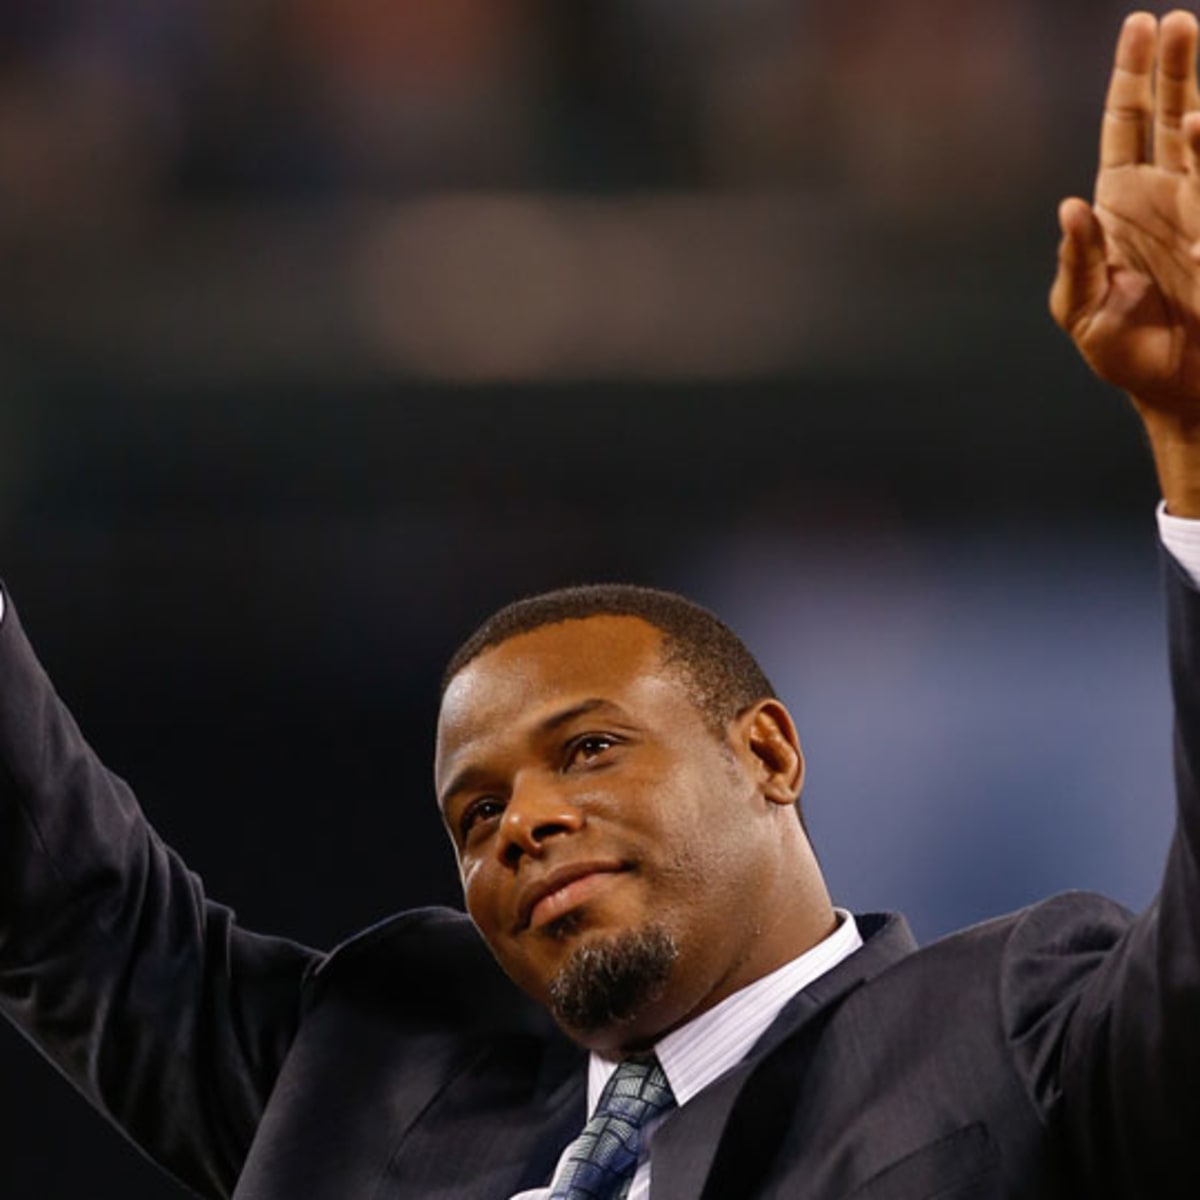 Griffey elected to Baseball Hall of Fame with highest percentage